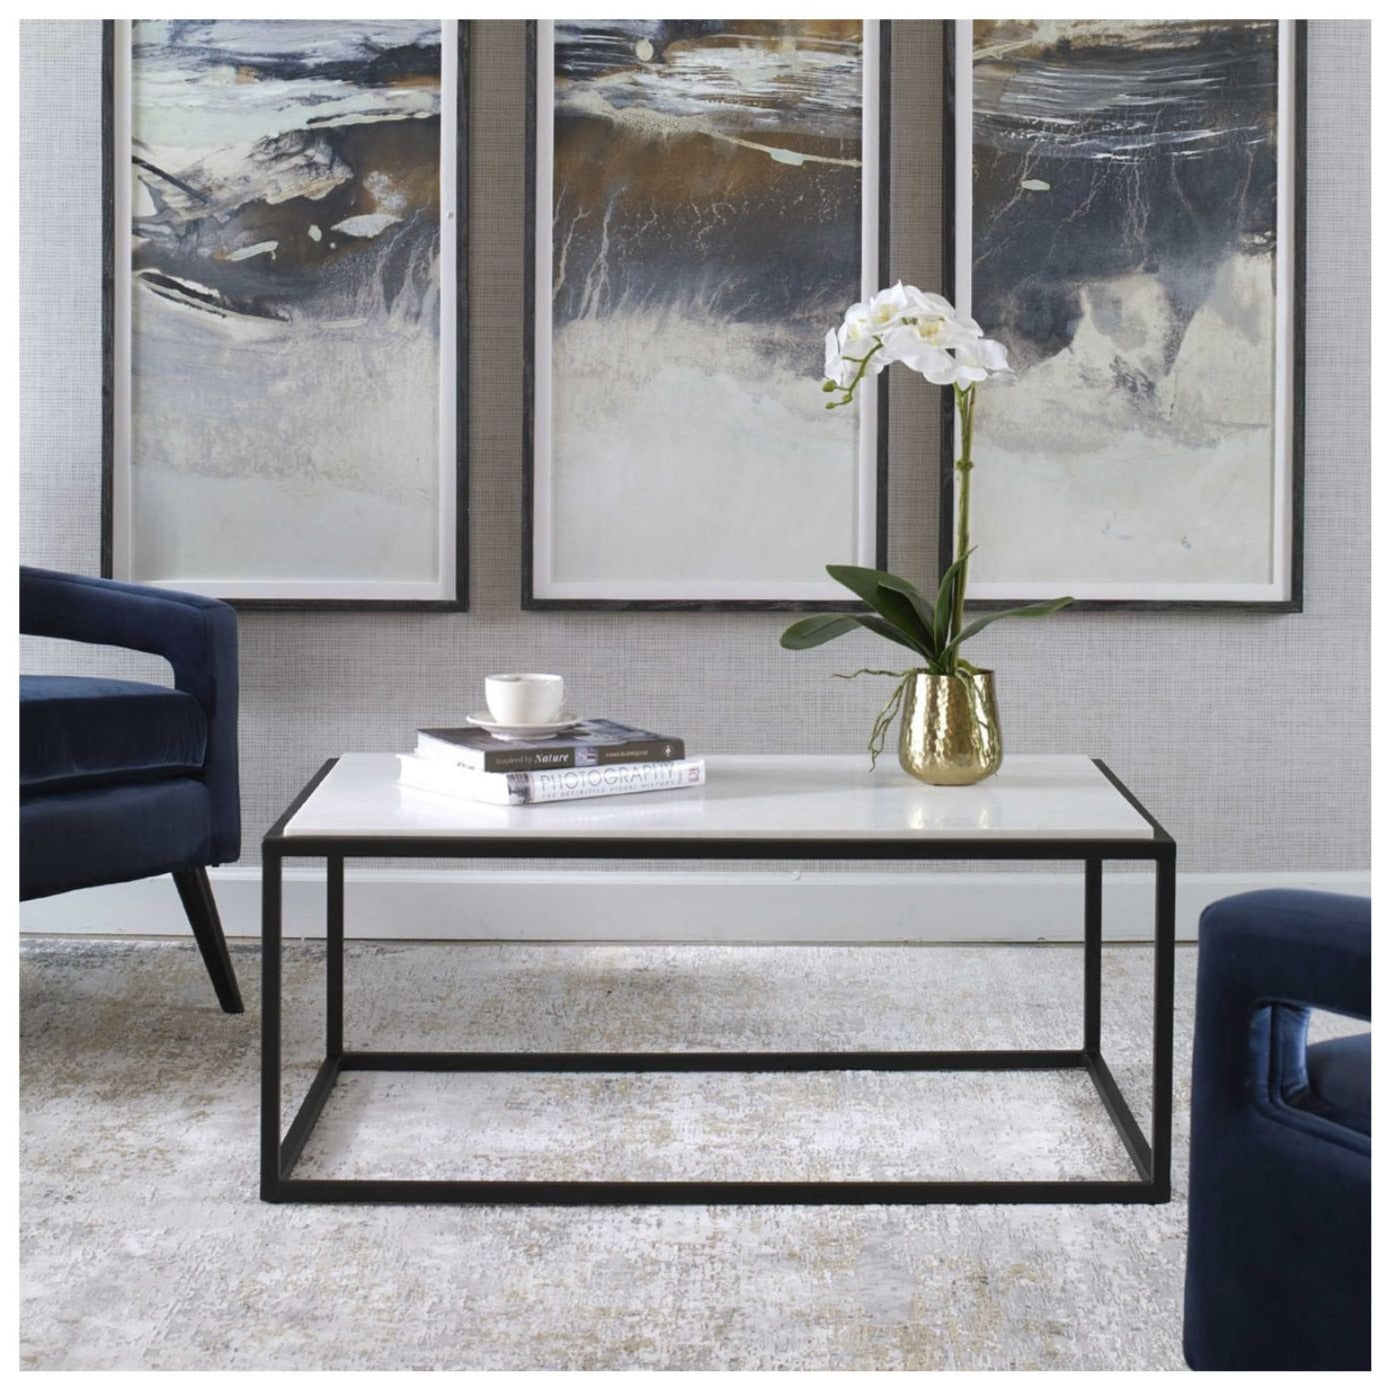 Room setting of this coffee table features a satin black iron frame accentuated by a beautiful inset white marble slab top with two chairs and art in the background.